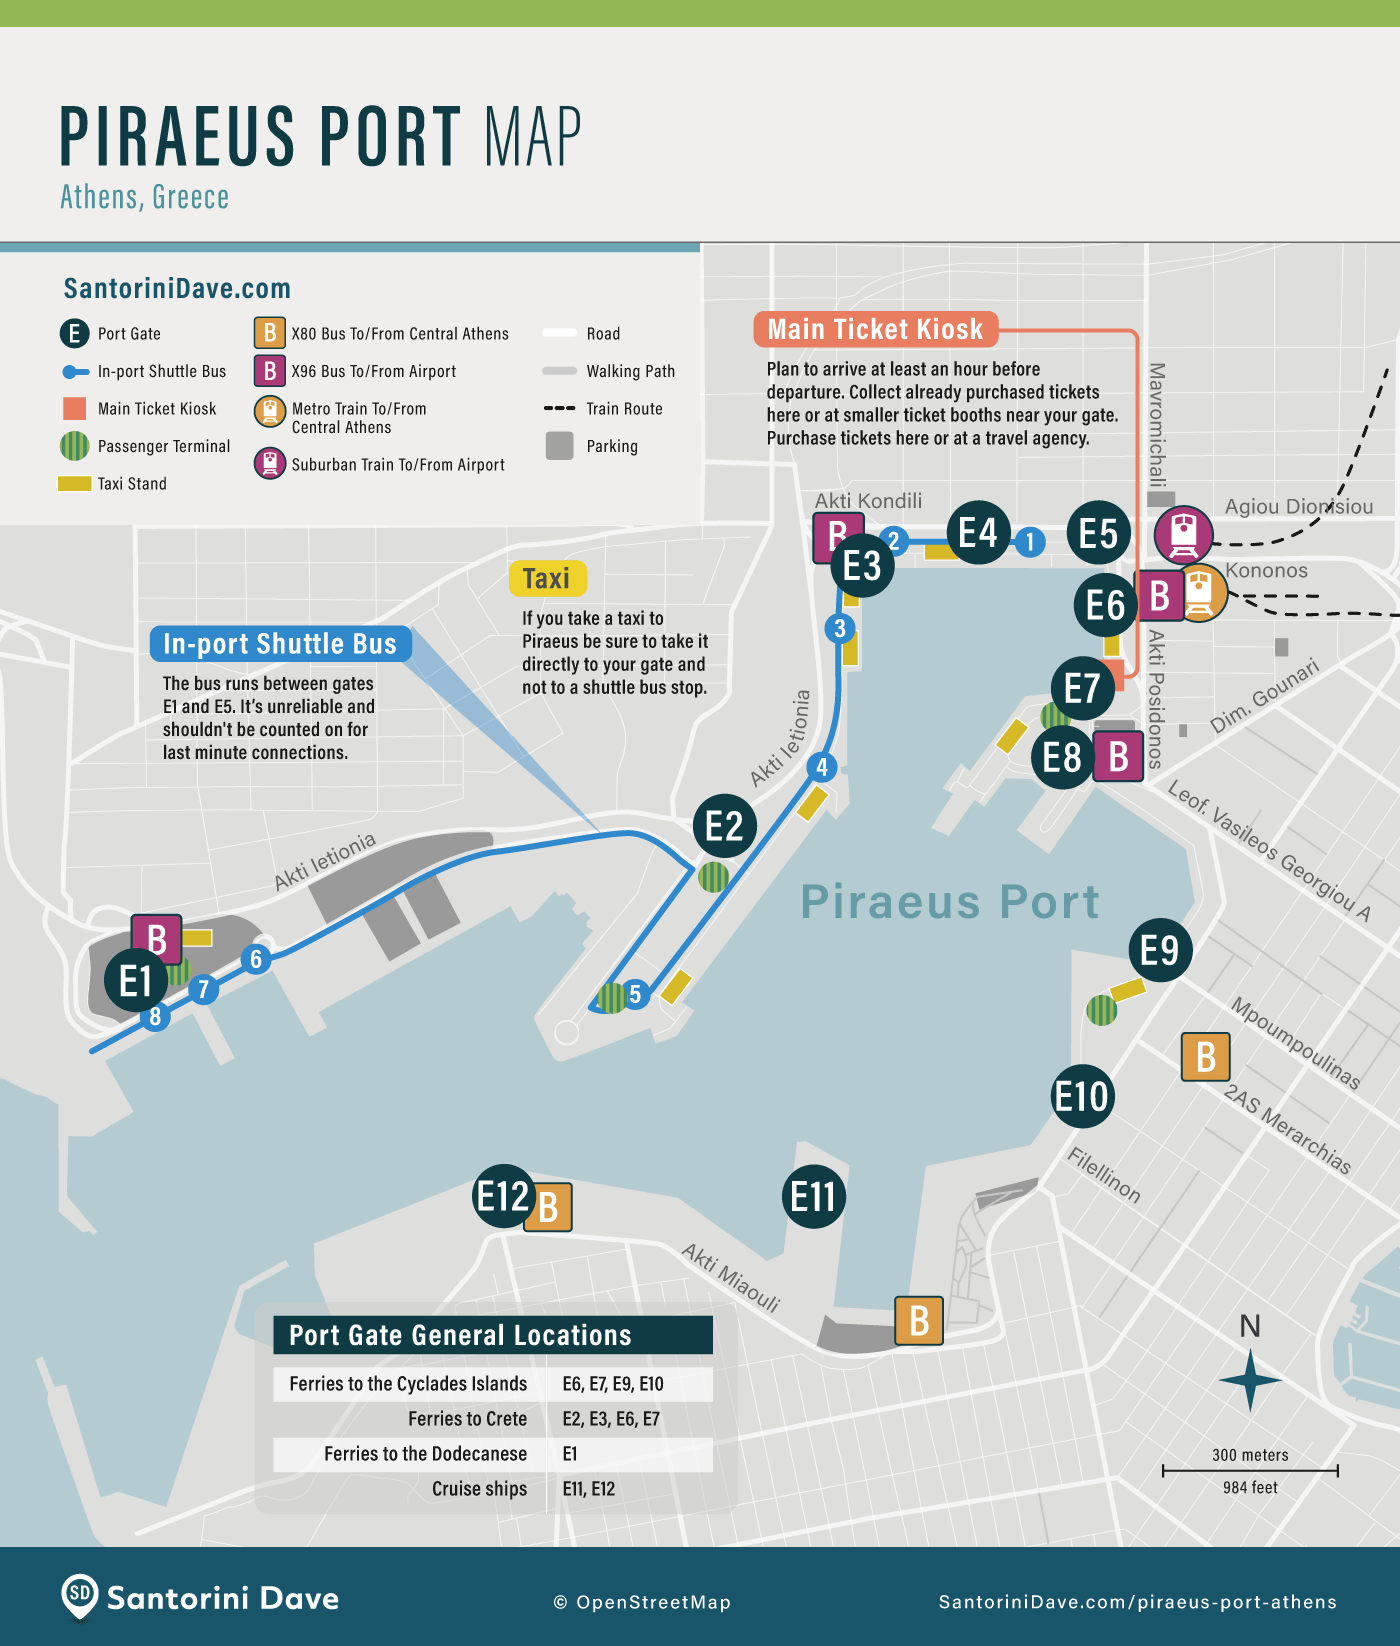 Map of Piraeus Port showing port gates, port shuttle bus route, passenger terminals, taxi stands, bus and train stops, and parking in Athens Greece.